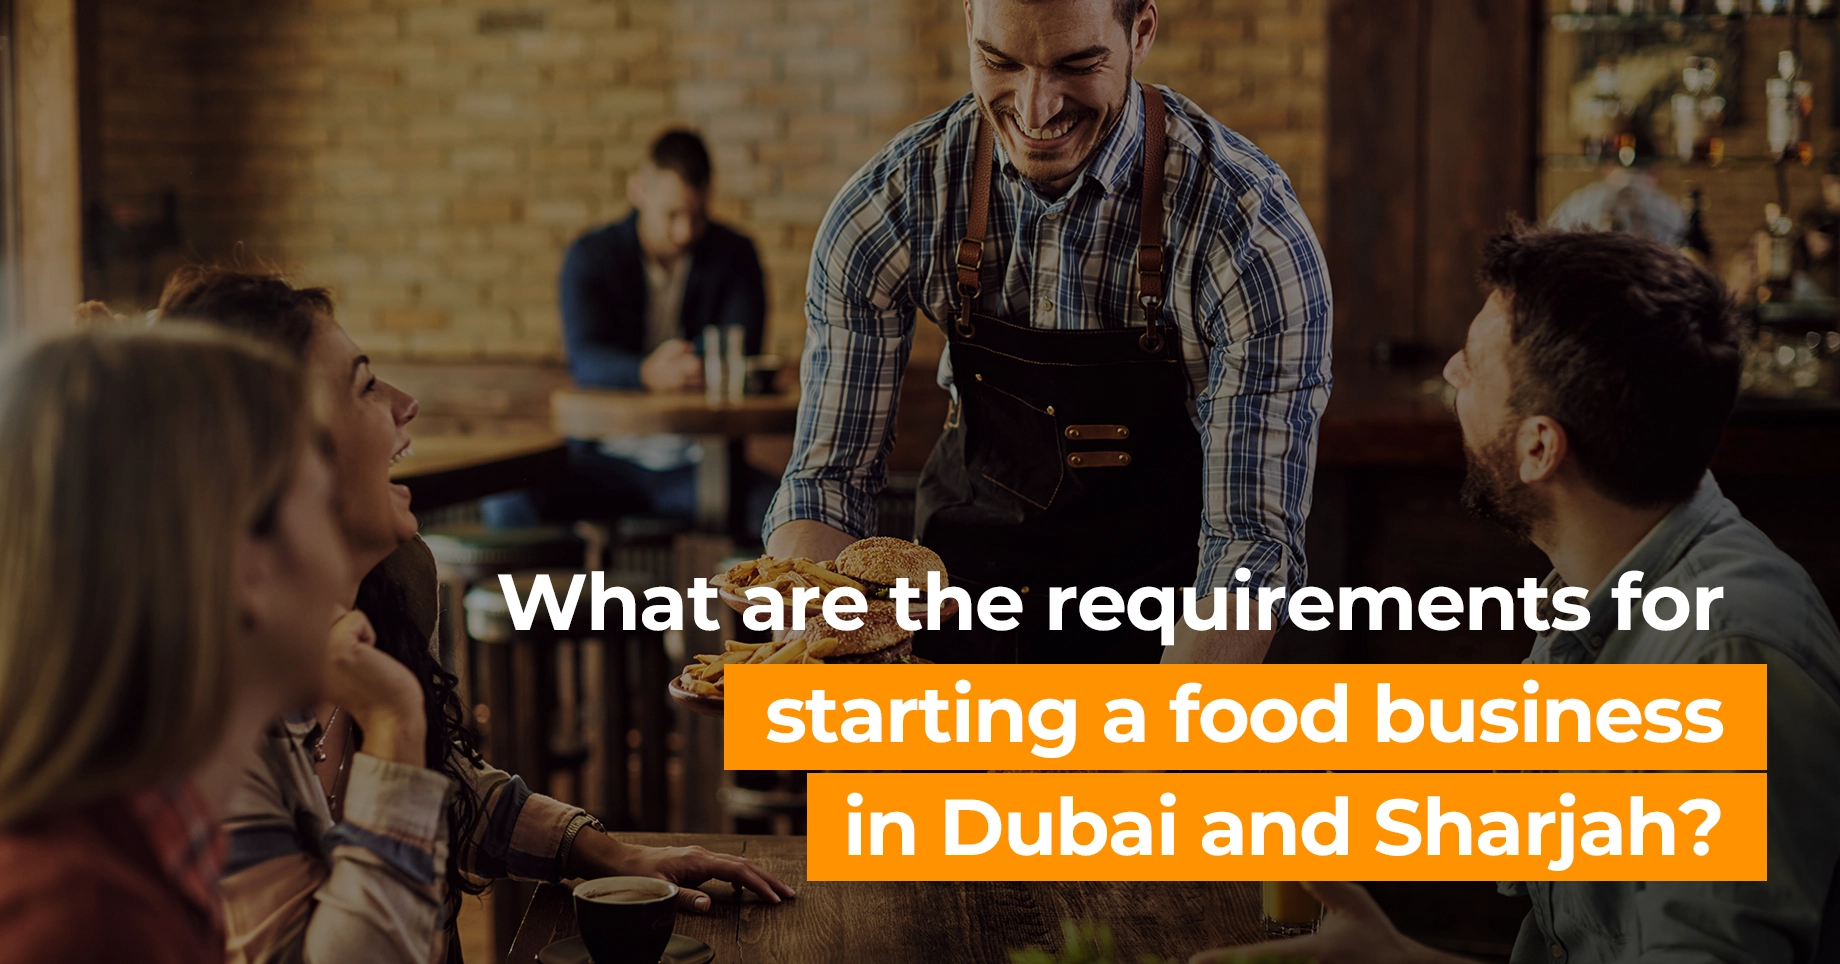 What are the requirements for starting a food business in Dubai and Sharjah?